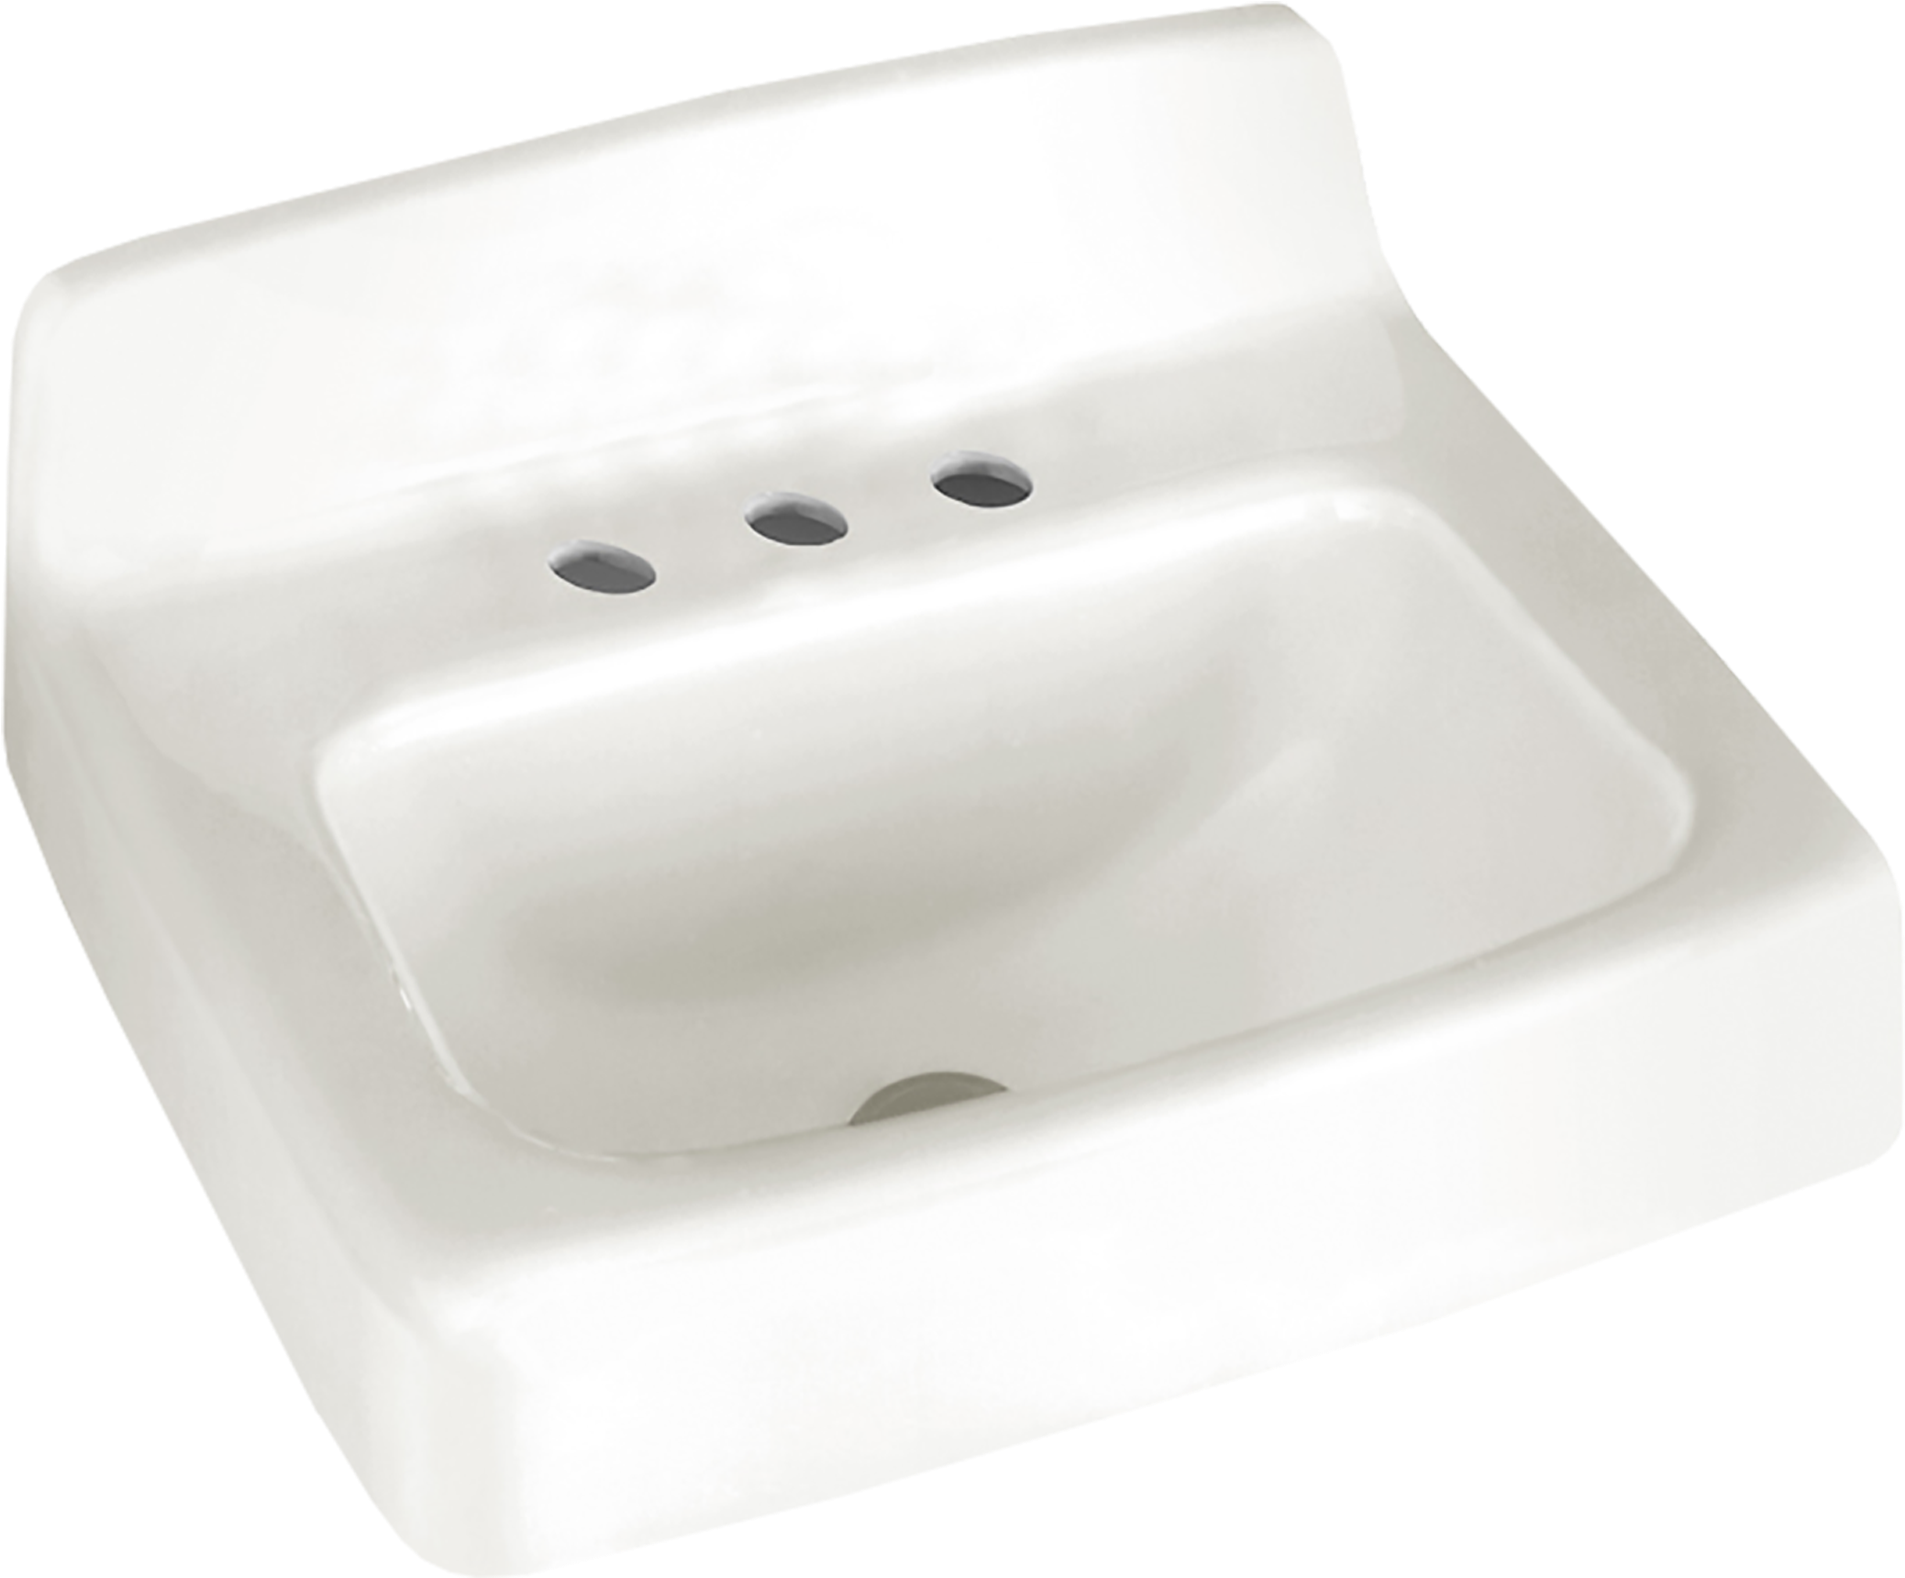 bathroom sinks costing about 271.00